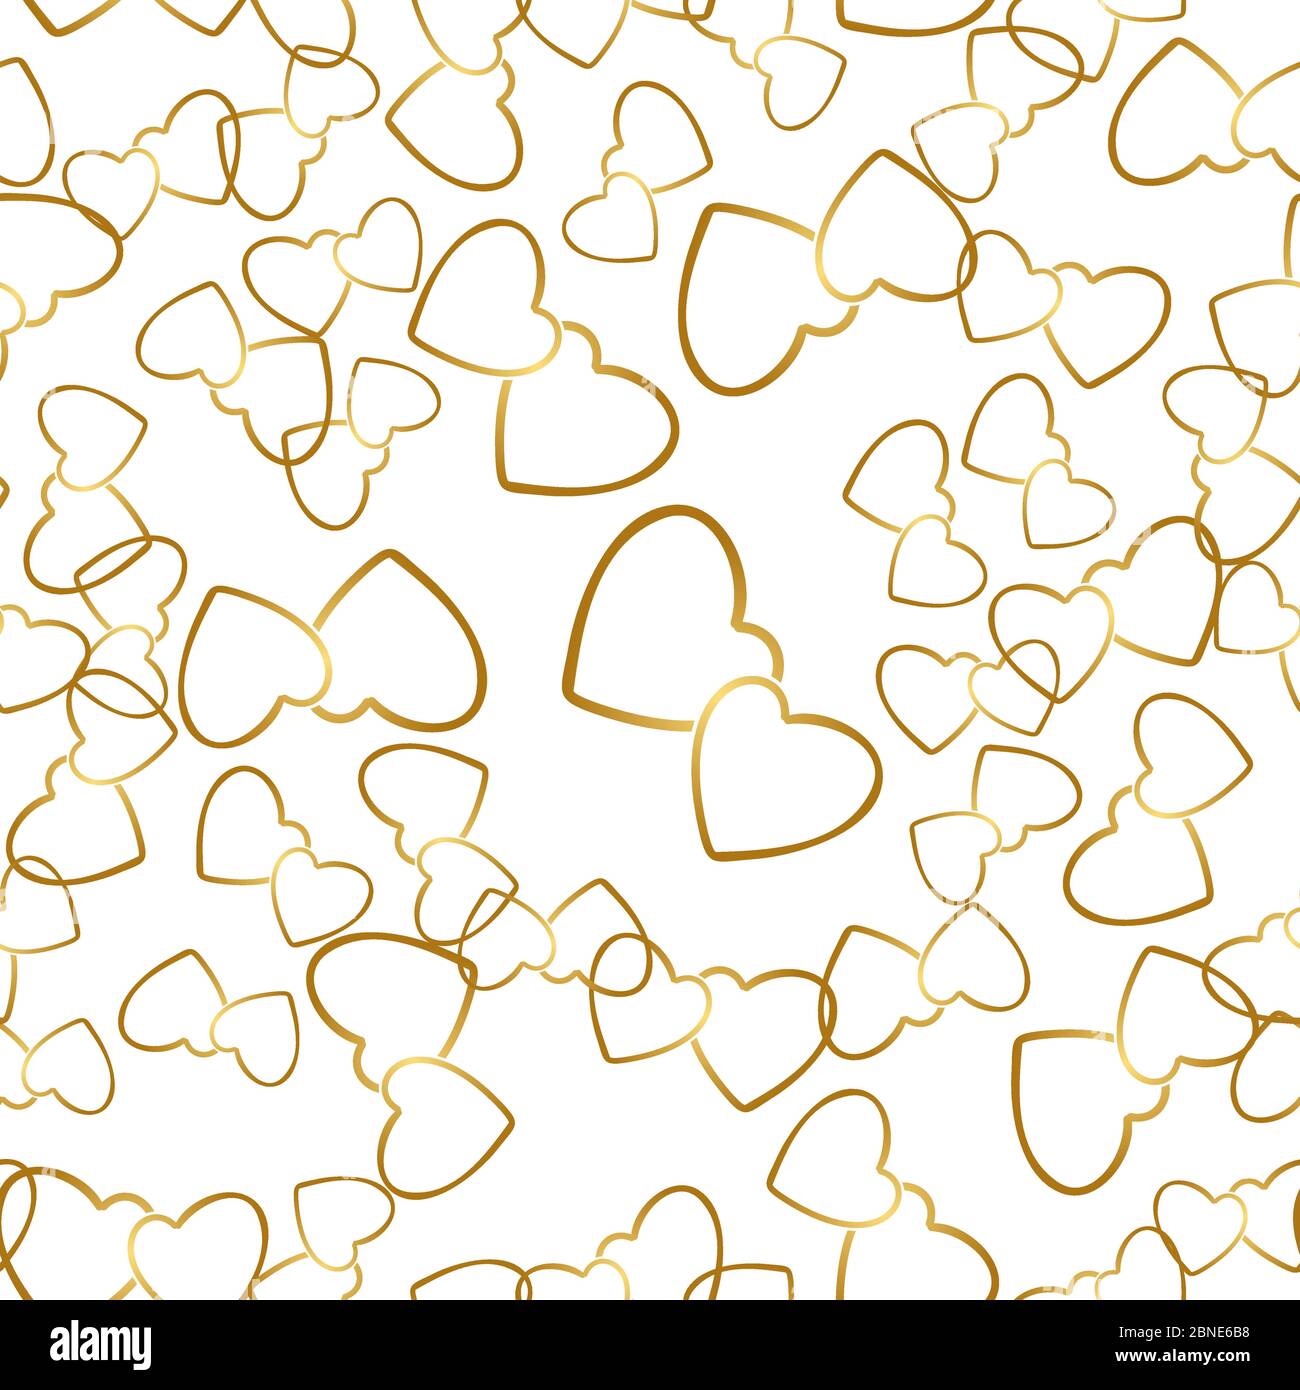 Two hearts seamless pattern. Golden pairs of heart symbols randomly placed on white background. Romantic wrapping texture for Valentine day gift or gr Stock Vector